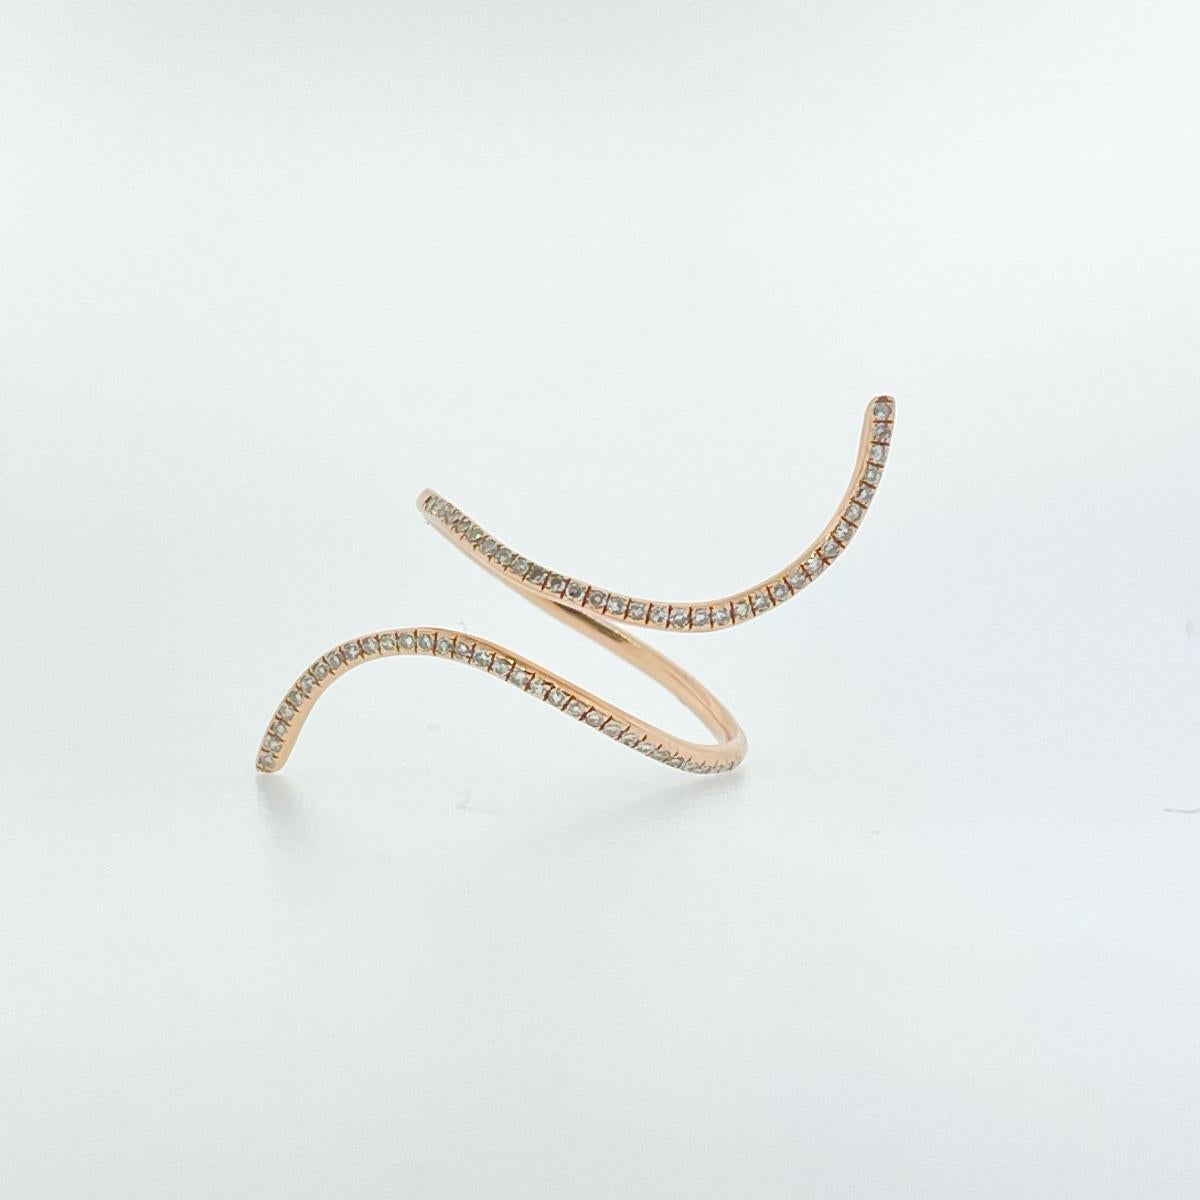 Make a statement with this 18K Rose Gold Diamond Wrap Ring. The ring holds Sixty-Four Round Diamonds Weighing 0.23ctw (G/SI in Quality) and is currently sized at a 7.5 but can be resized to fit. 